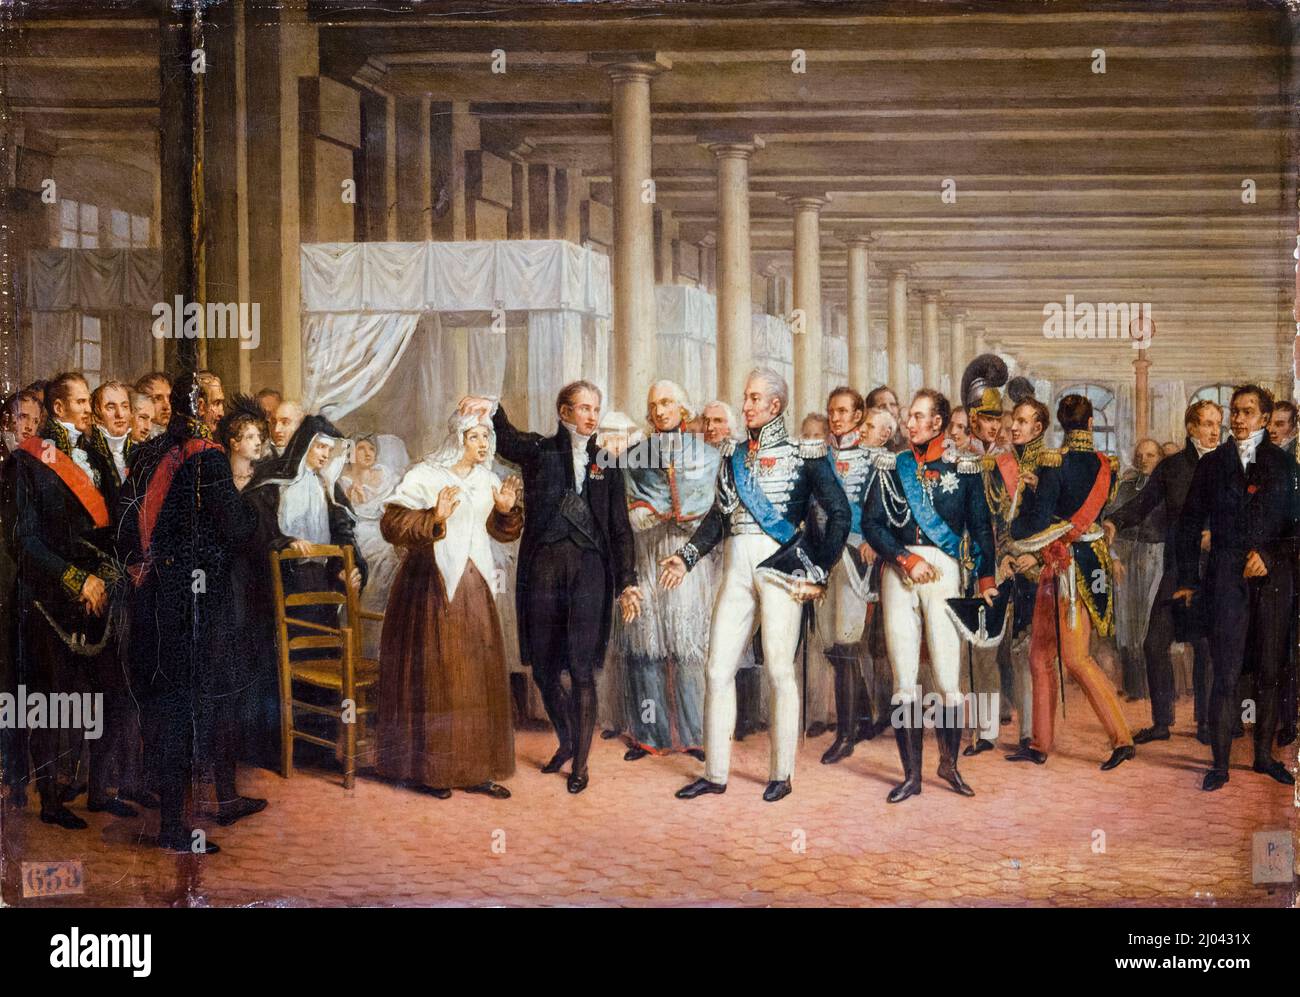 Guillaume Dupuytren (1777-1835), French Surgeon at the Hôtel-Dieu presenting Charles X (1757-1836) King of France with a patient after eye surgery, oil on canvas painting by unknown artist, circa 1825 Stock Photo